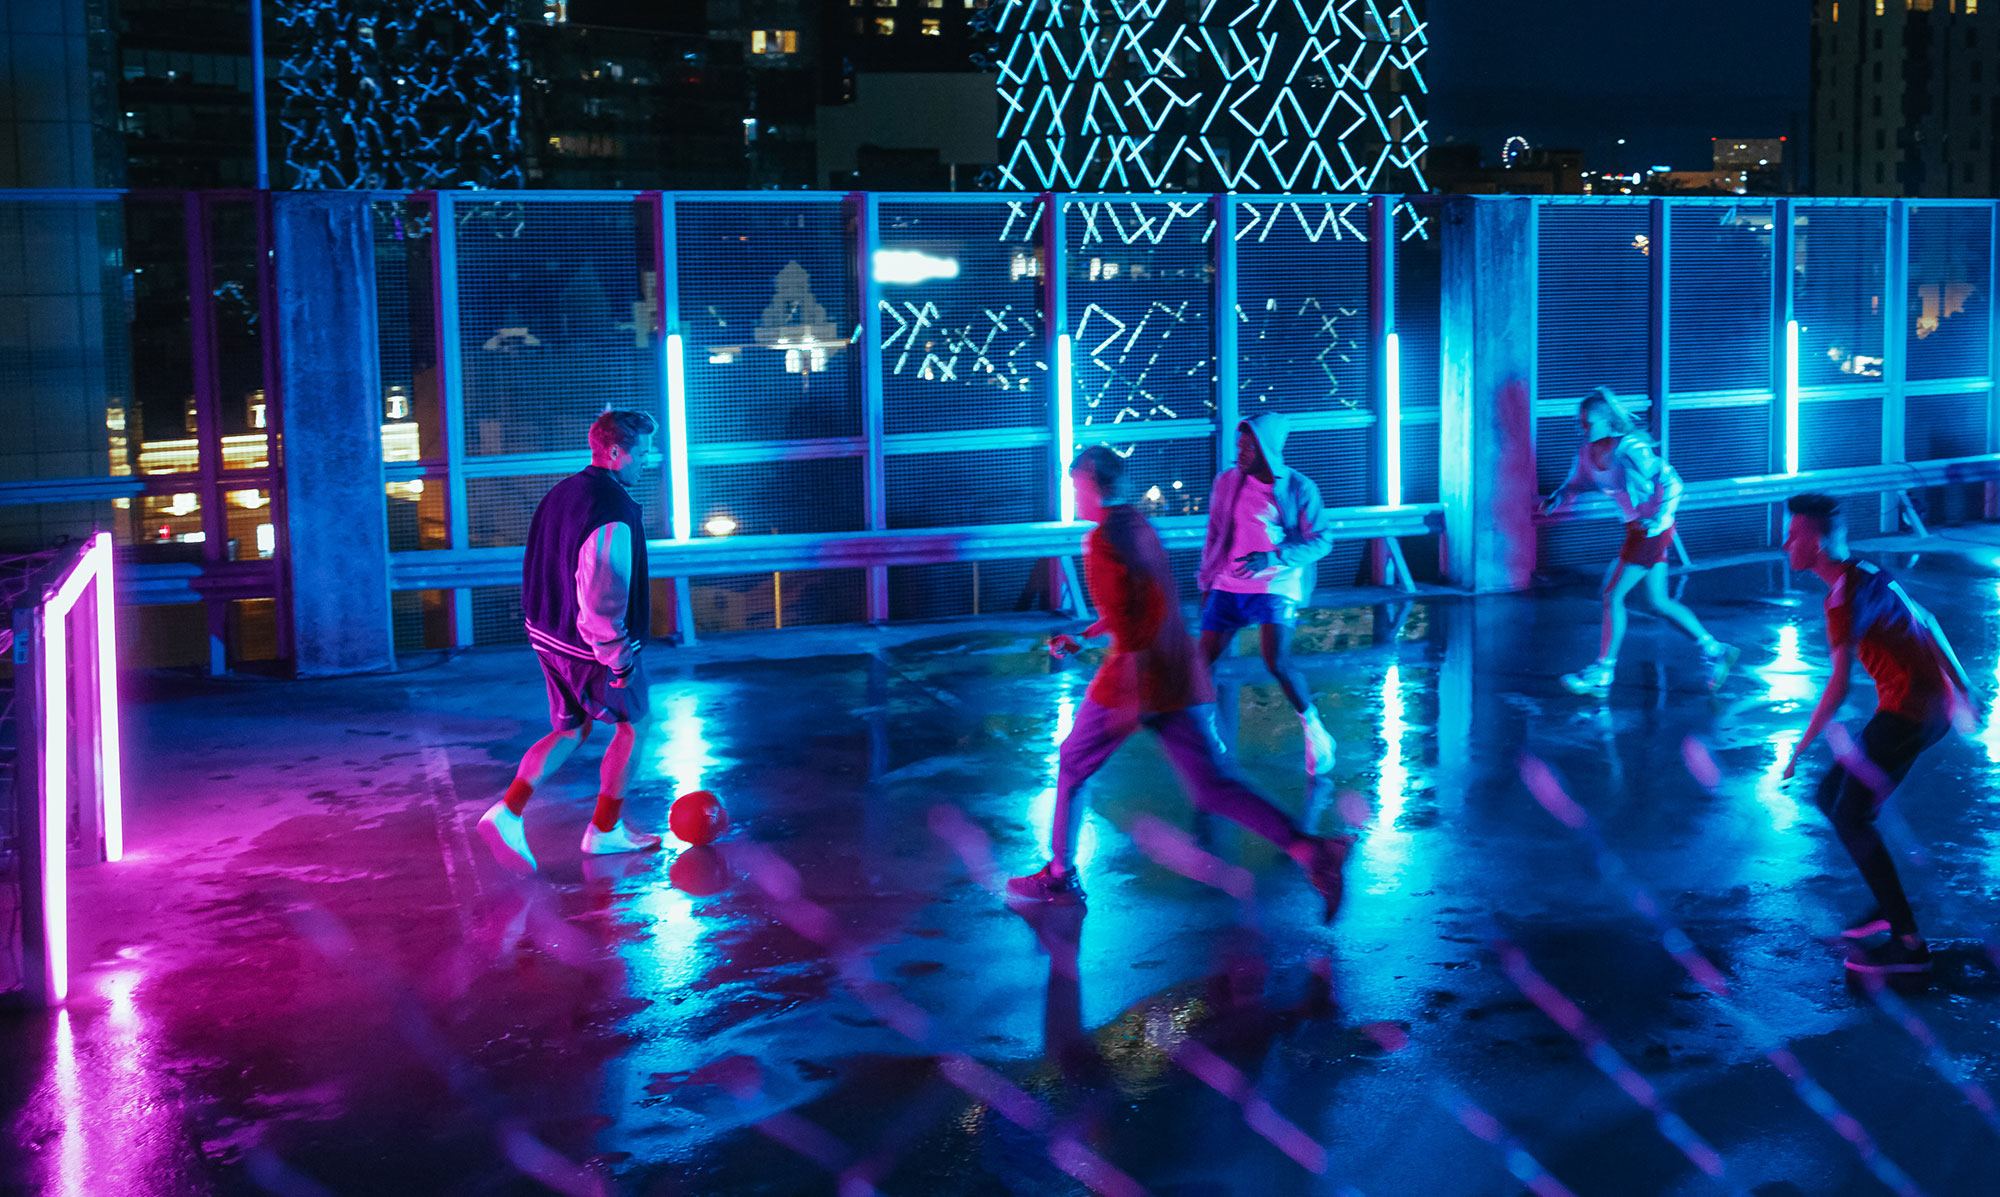 Night basketball game on rooftop lit with neon lights